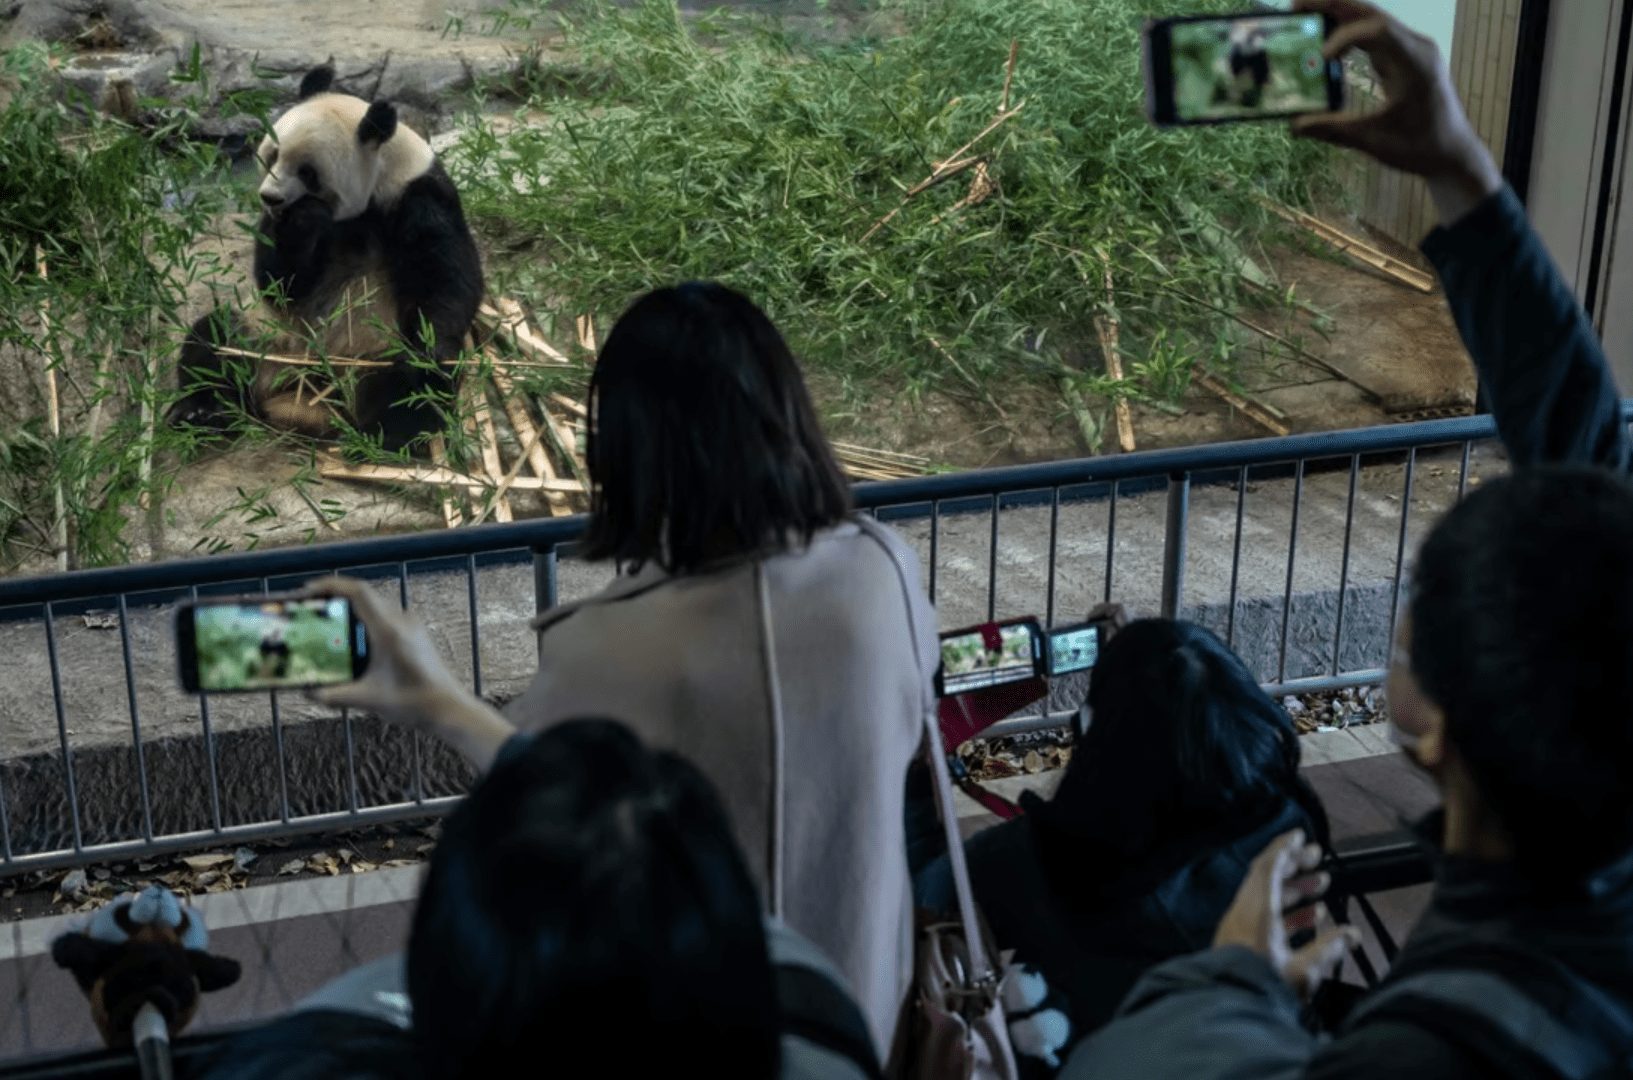 a crowd watching a panda in its enclosure